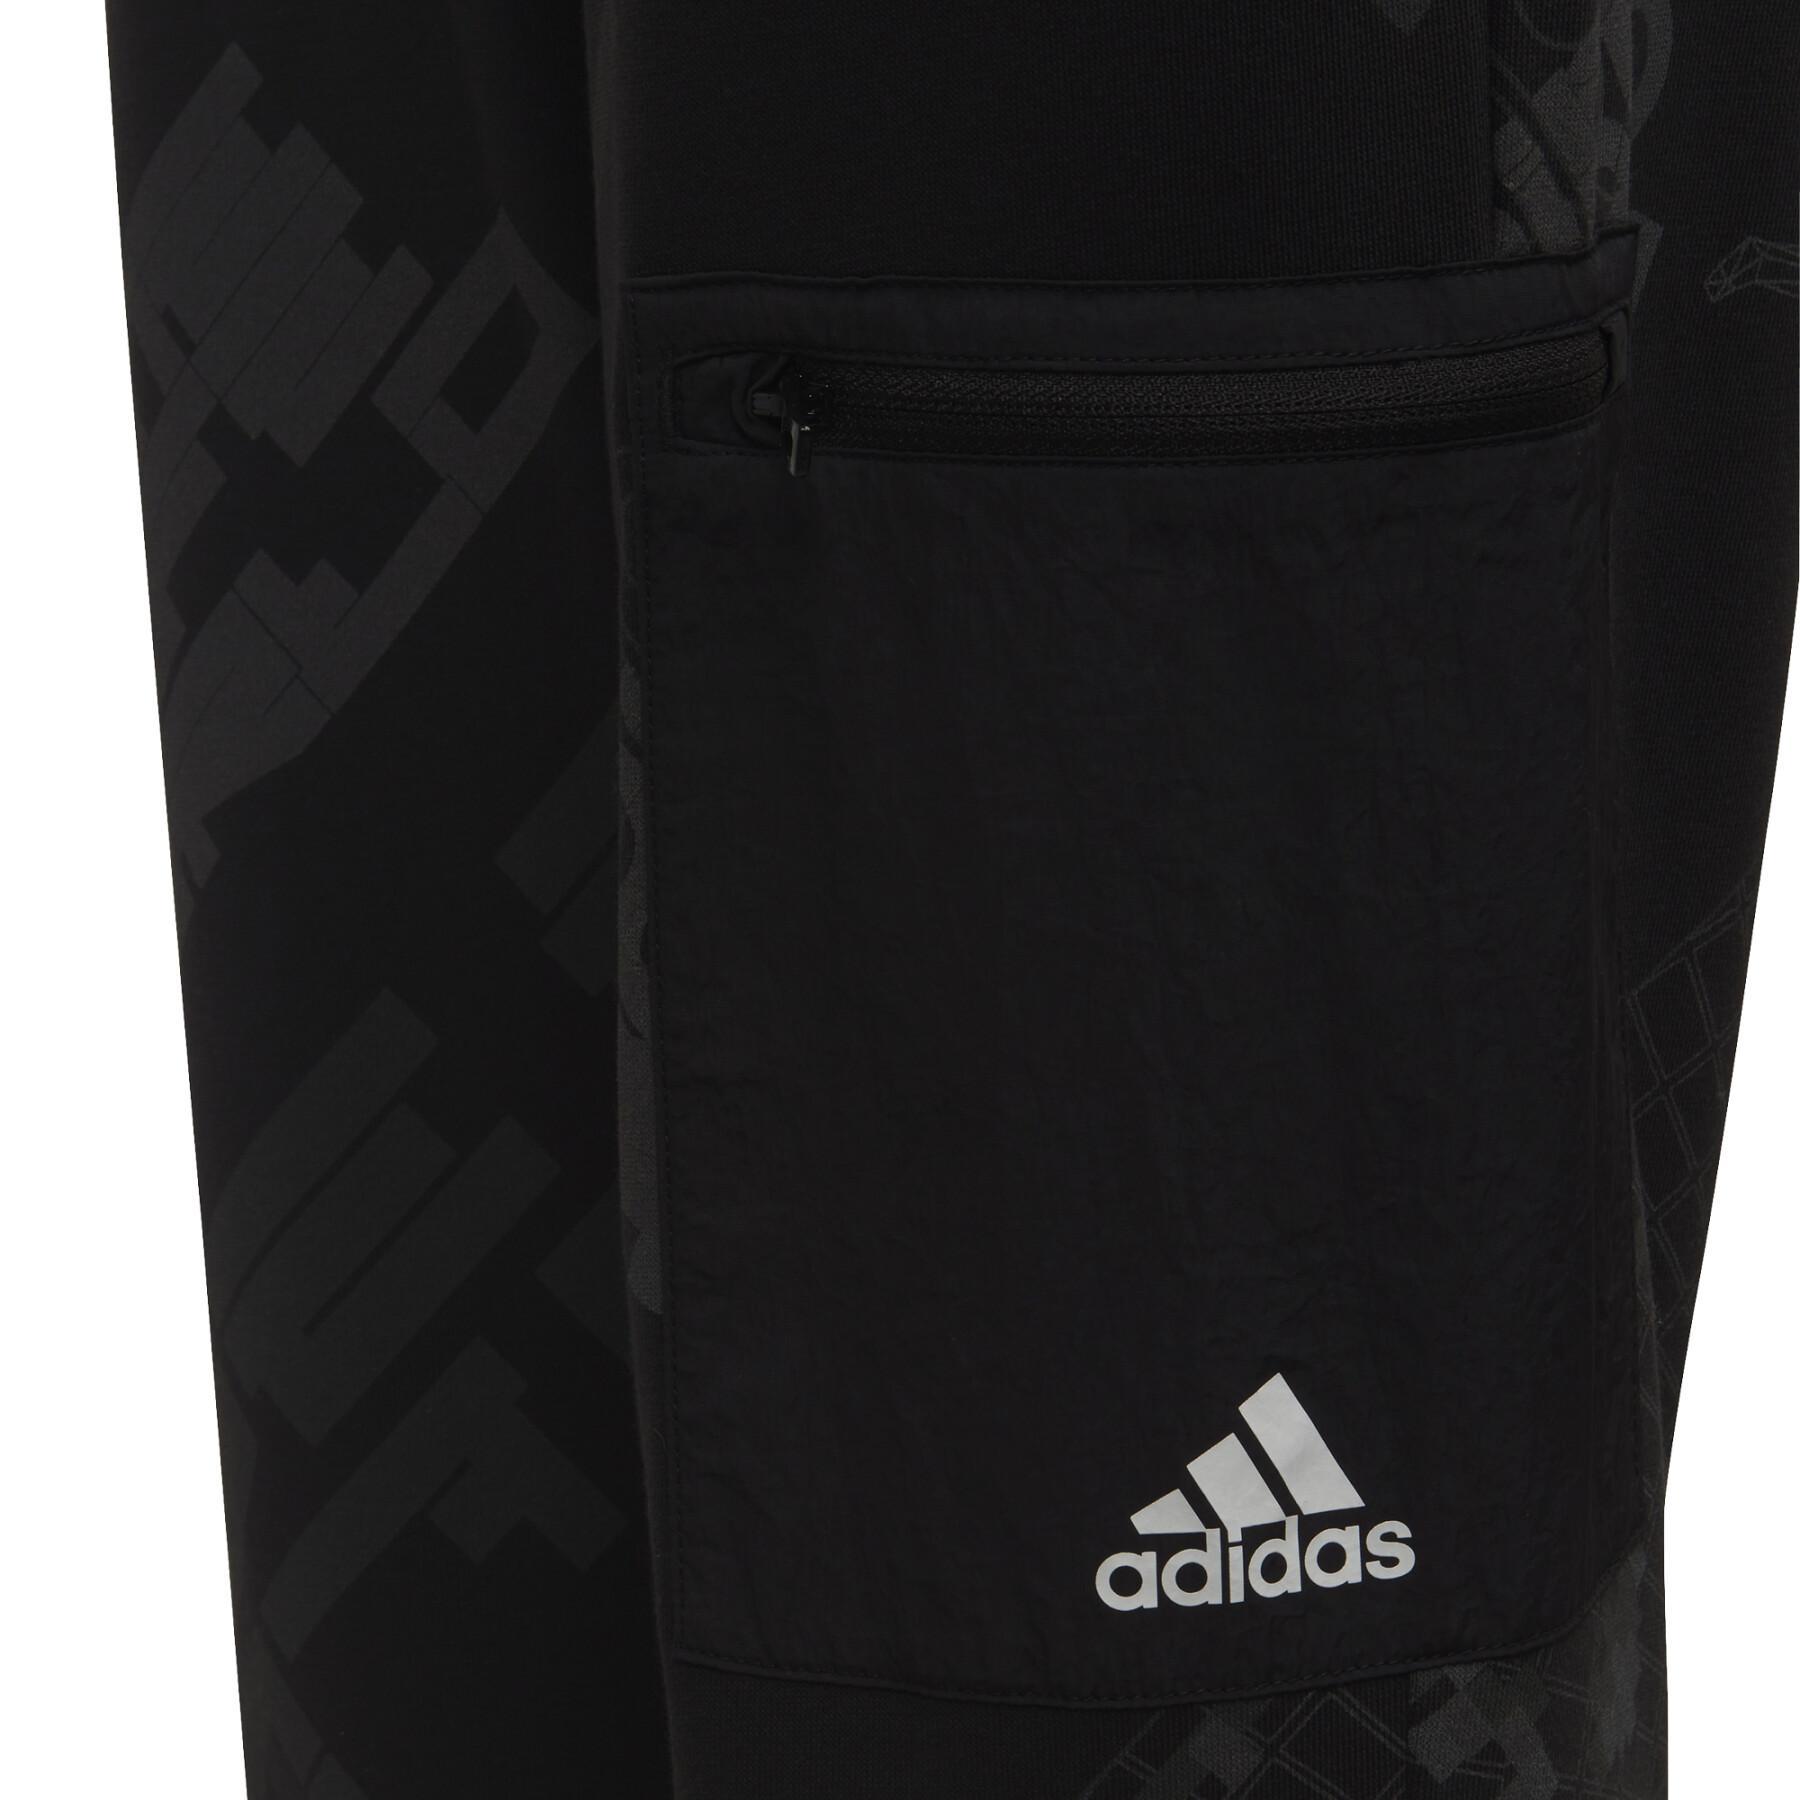 Children's trousers adidas Arkd3 Pocket